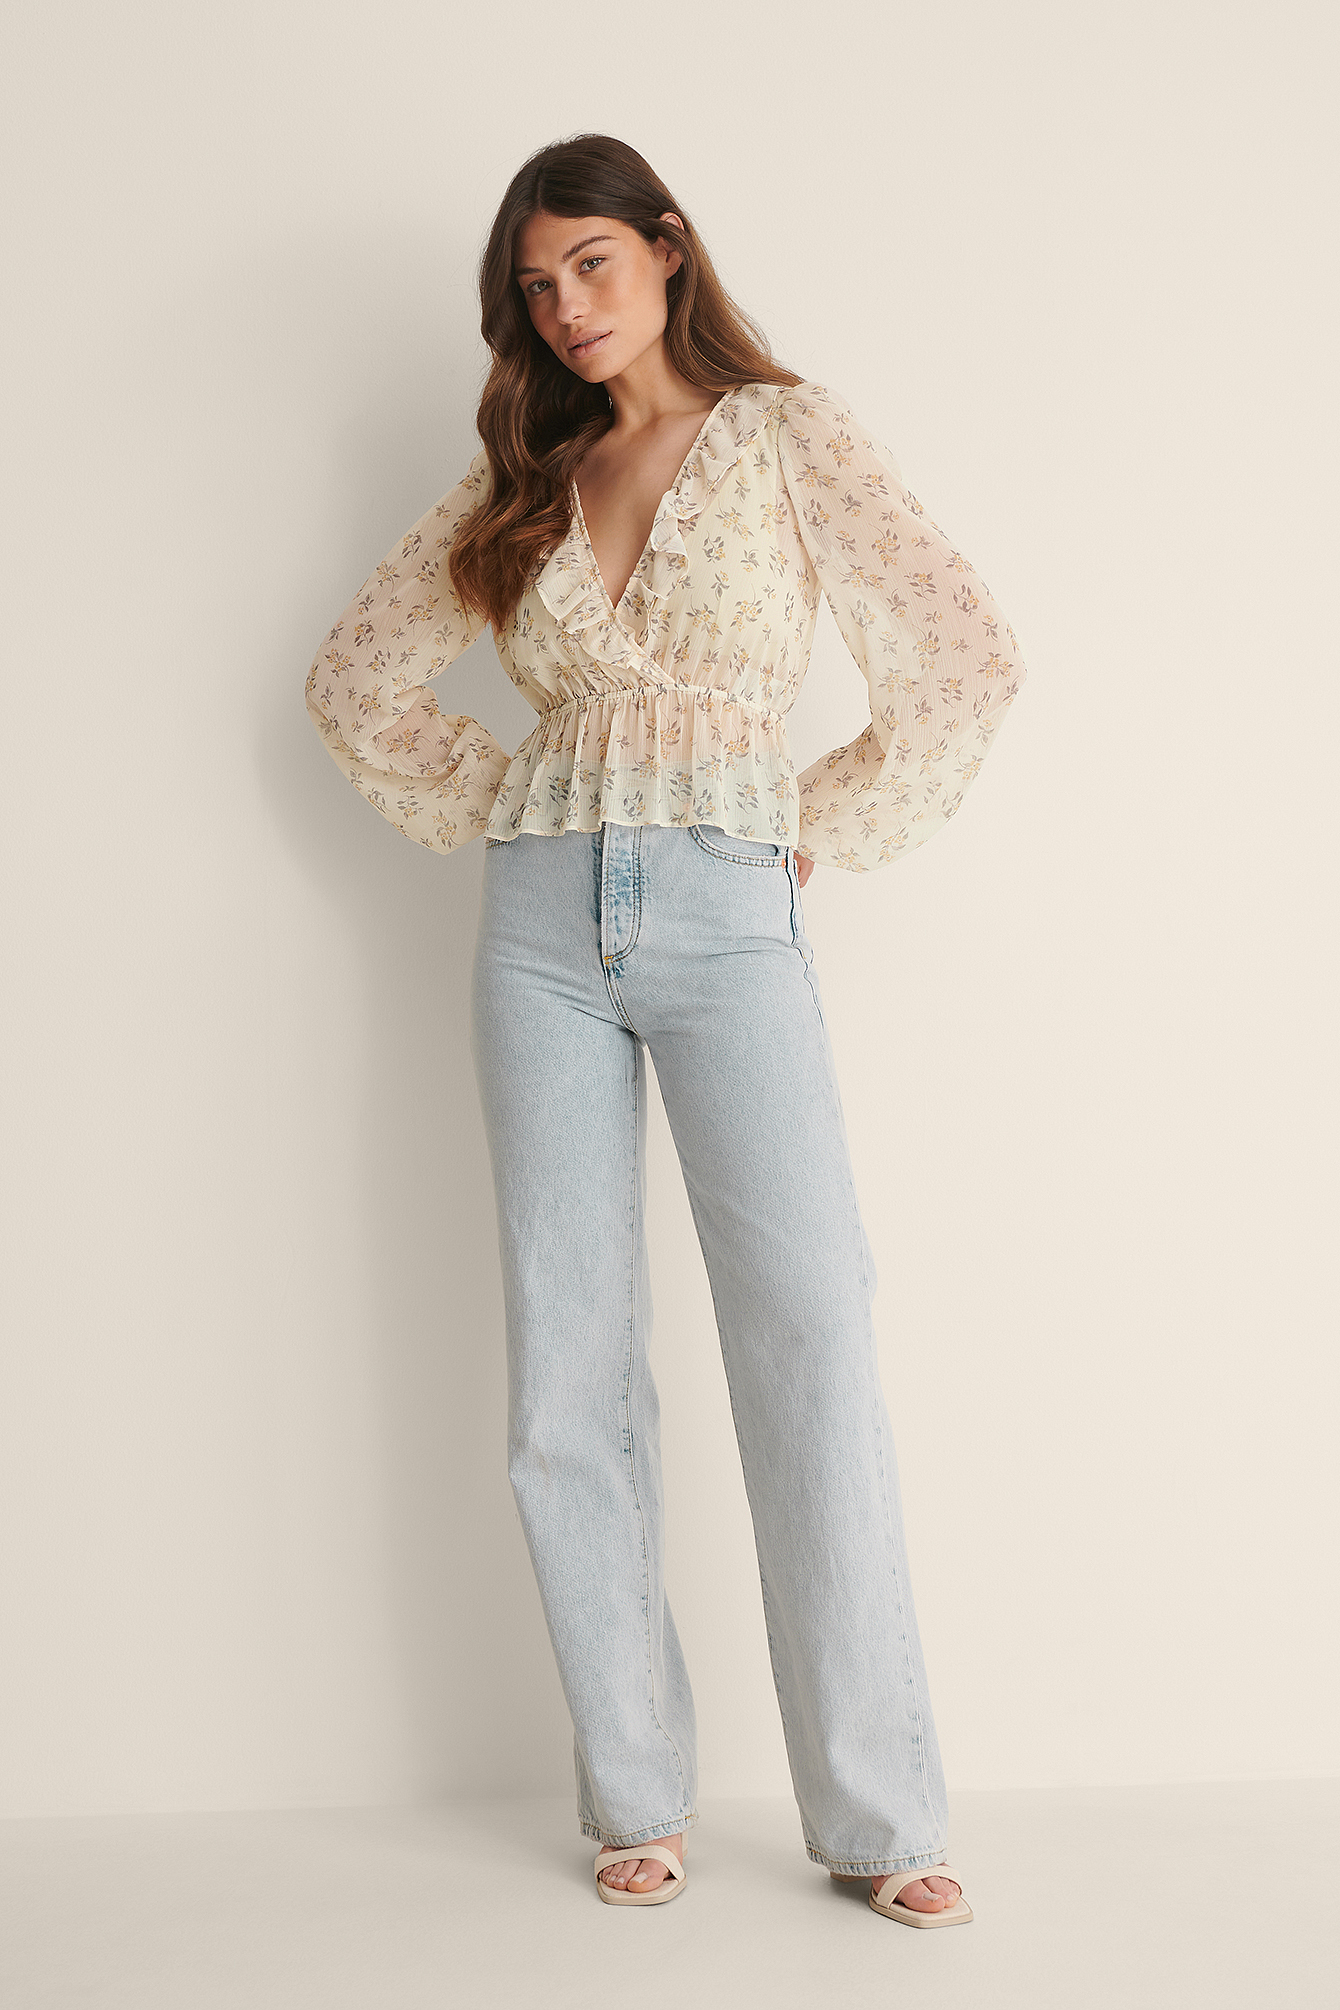 Elastic Waist Frill Blouse Outfit.